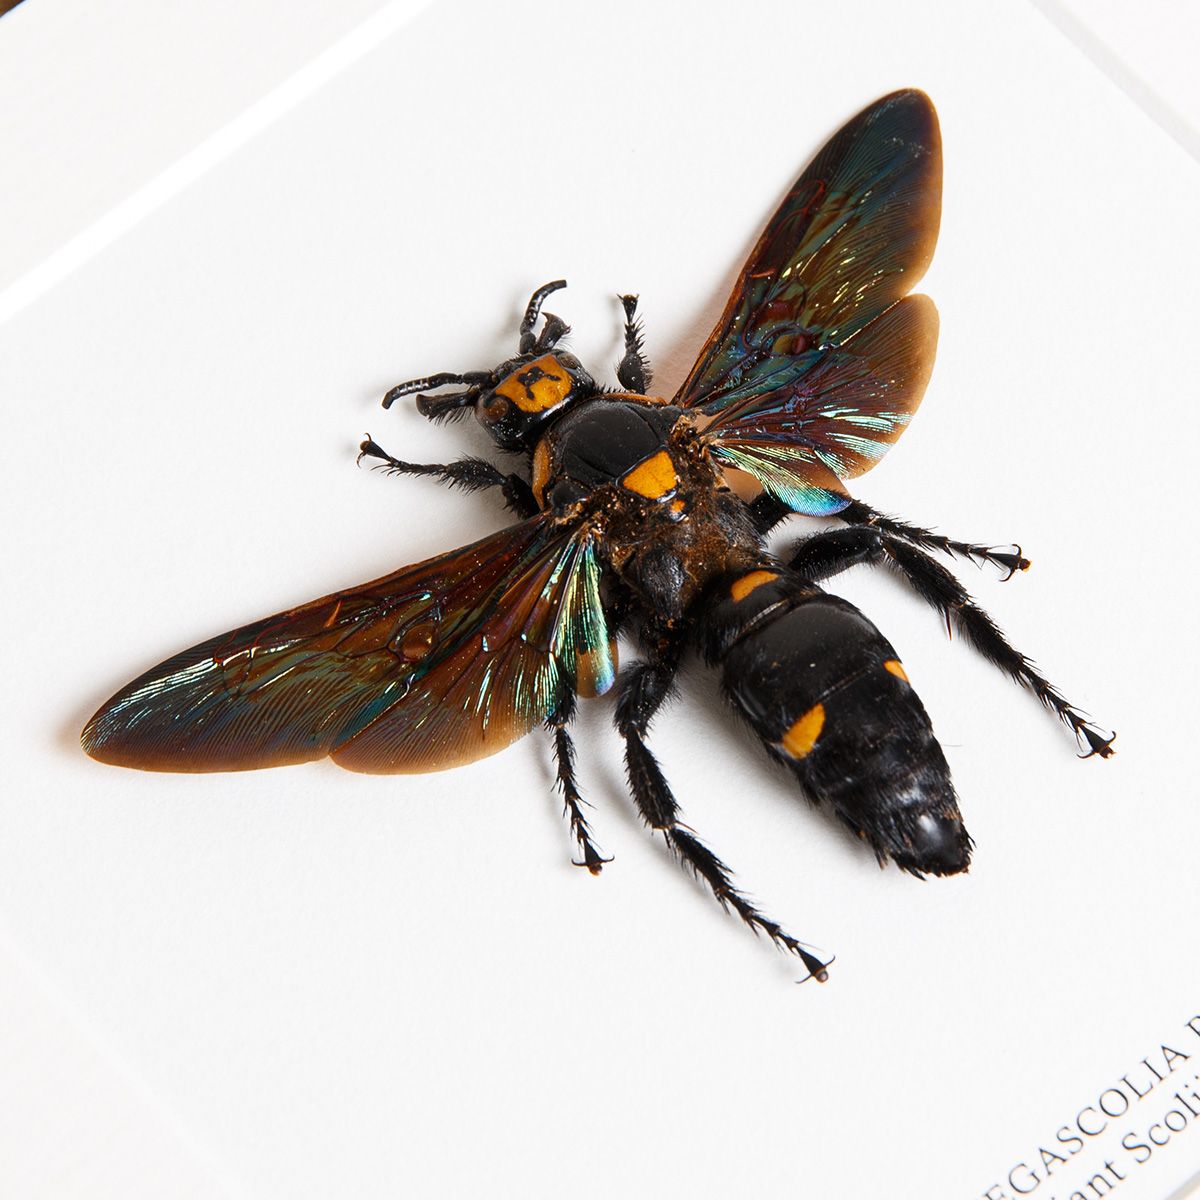 Giant Scoliid Wasp (XL) in Box Frame (Megascolia procer)